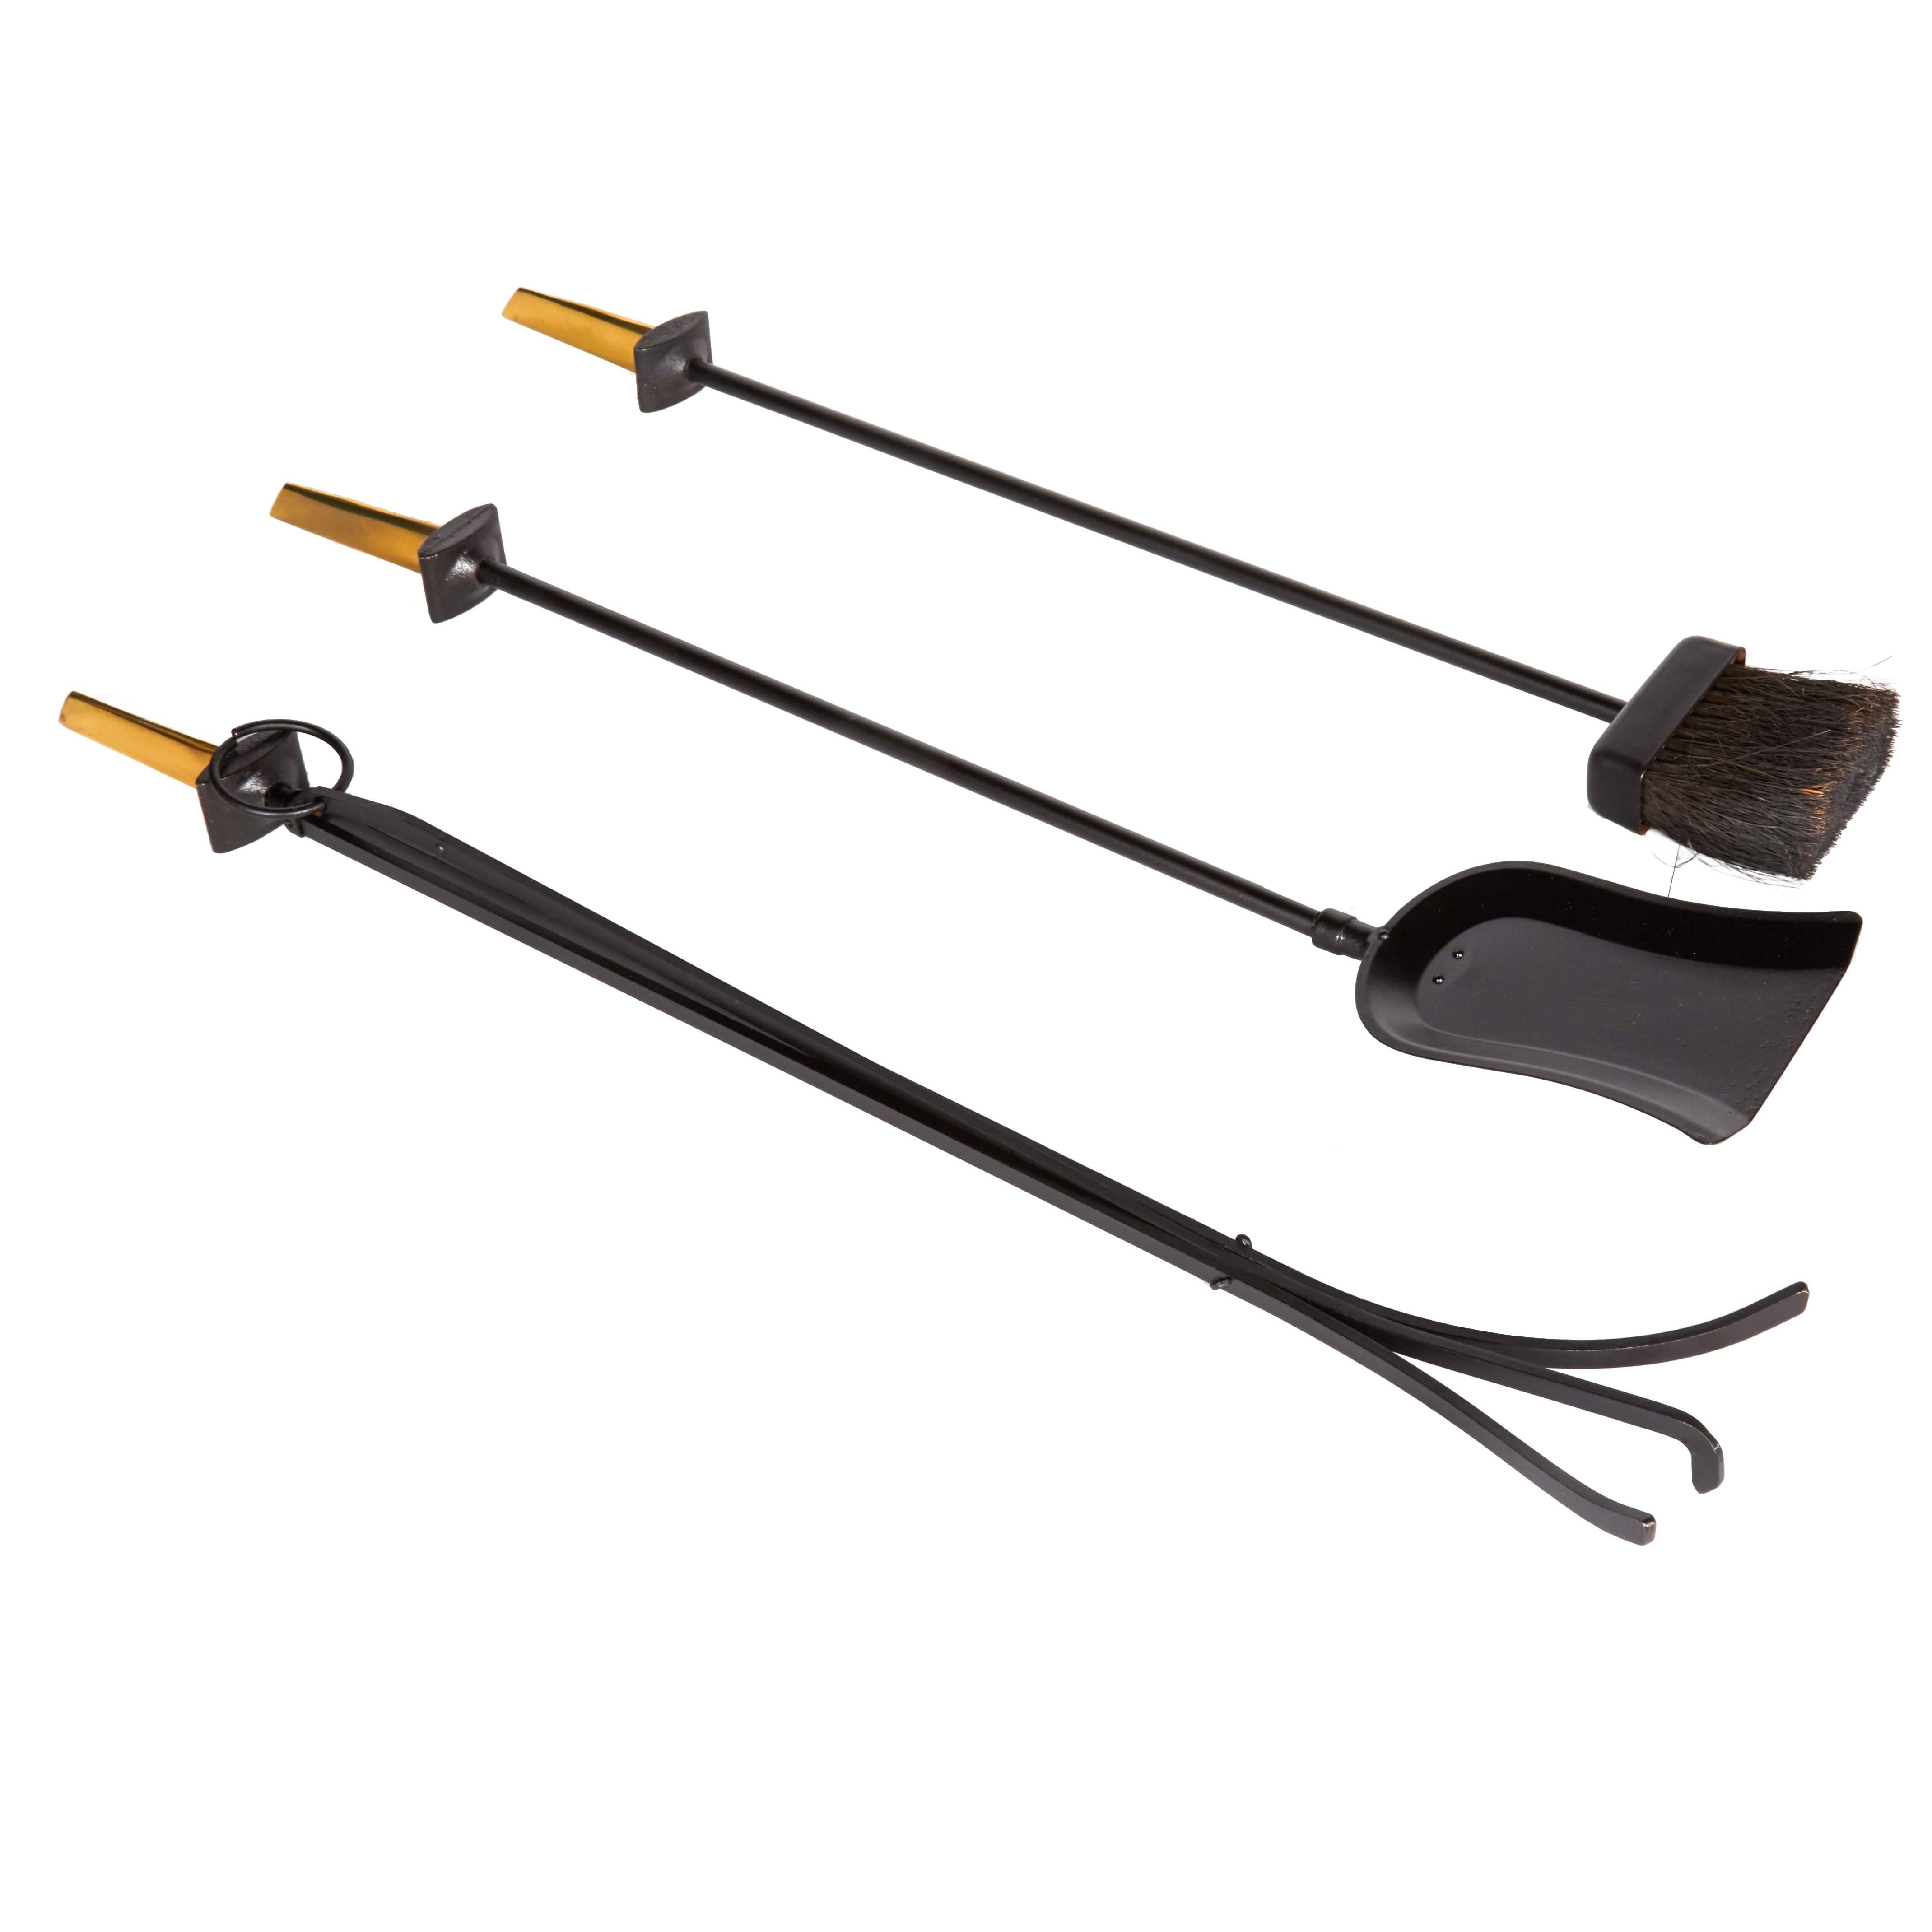 Mid-Century Modern fireplace tool set by iconic 20th century designer Donald Deskey, for the Bennett Company. The set features a wall-mounted backplate which houses the shovel, brush and poker. The tools are all made of wrought iron with a black